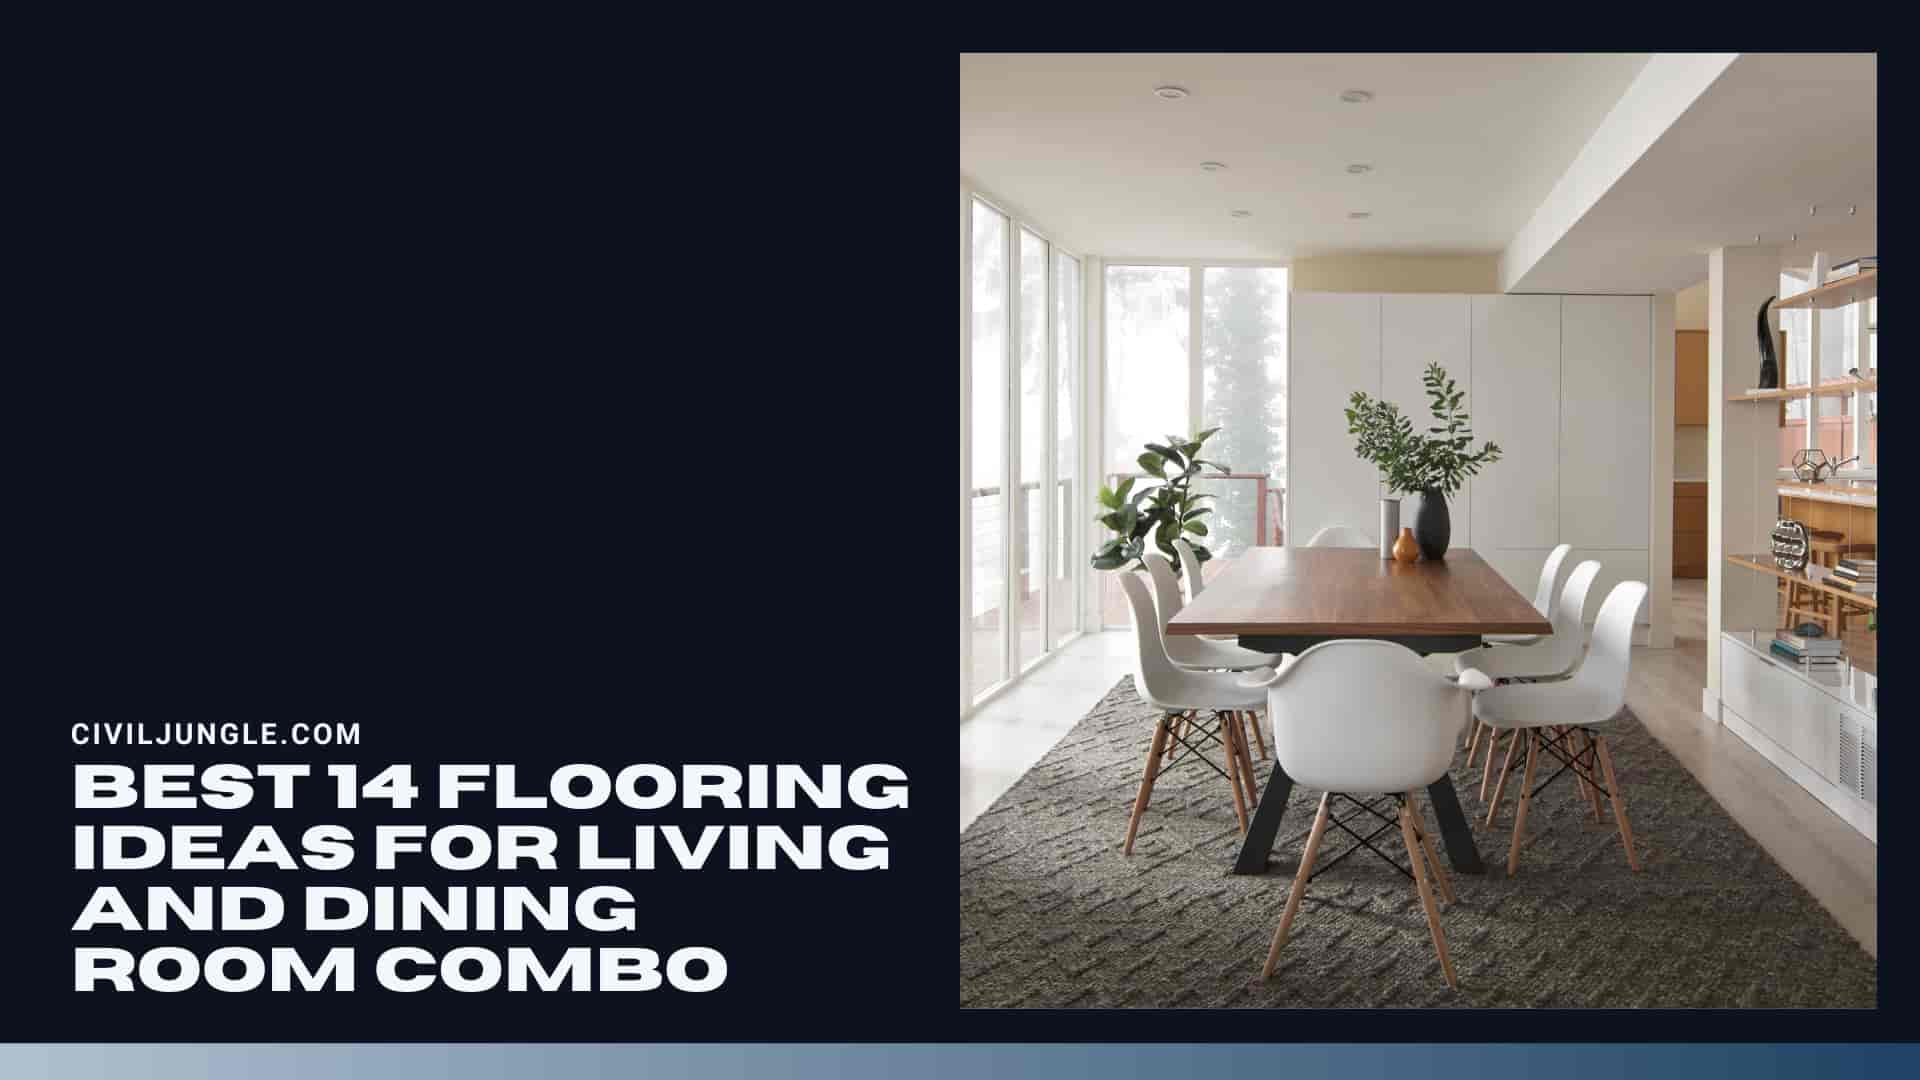 Best 14 Flooring Ideas for Living and Dining Room Combo